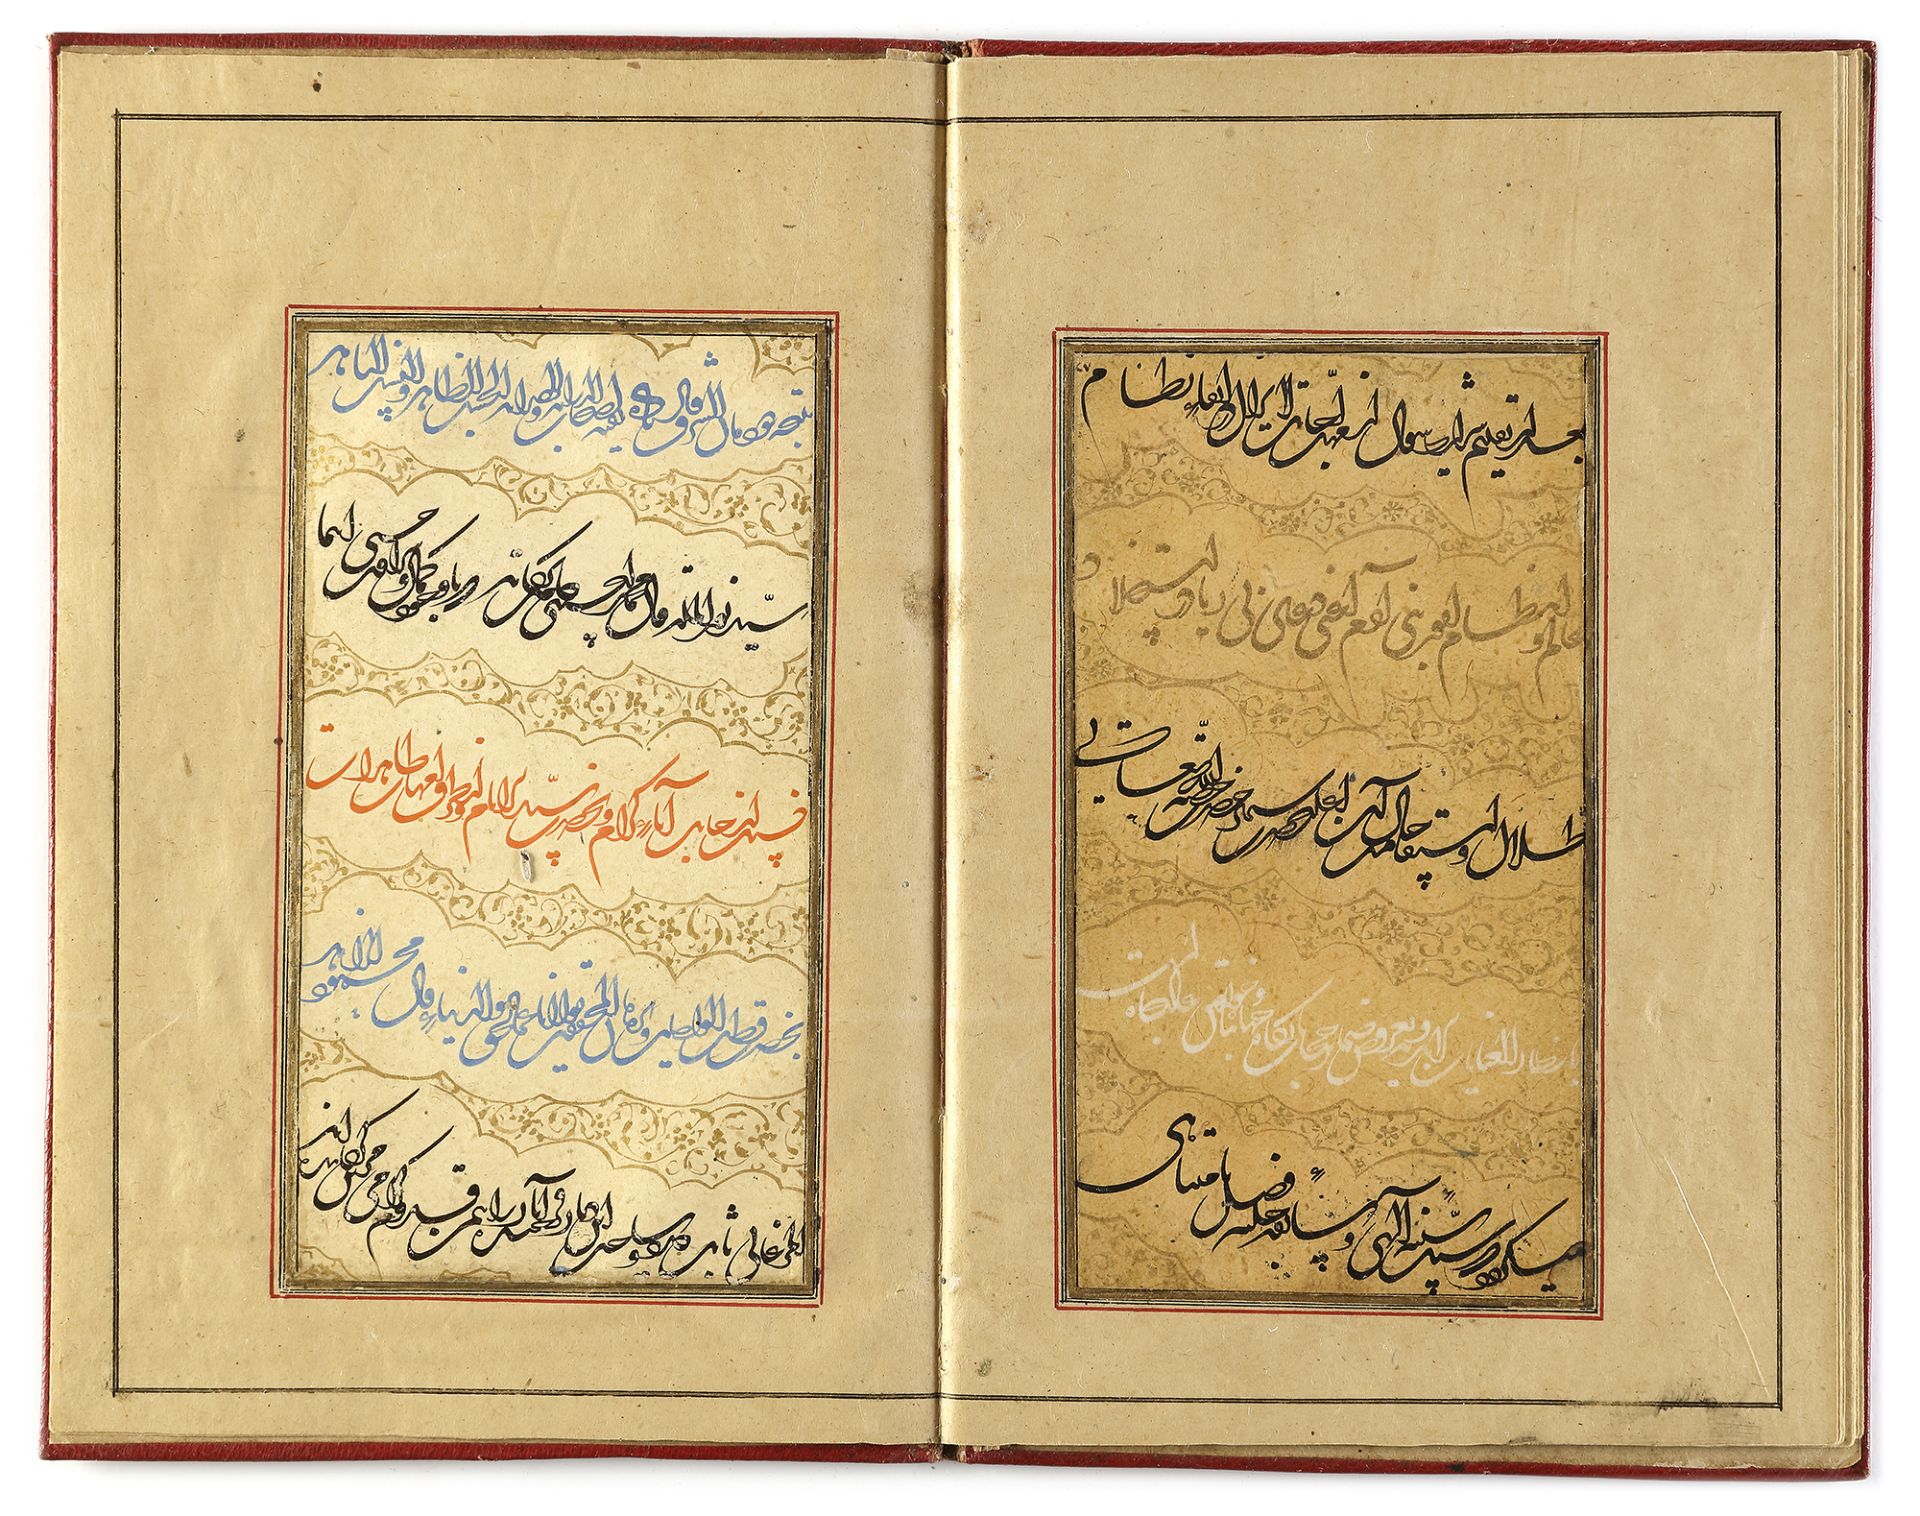 A MANUSCRIPT OF POETRY, SIGNED BY IKHTIYAR AL-MUNSHI, PERSIA, SAVAFID, DATED 975 AH/1567-68 AD - Image 13 of 18